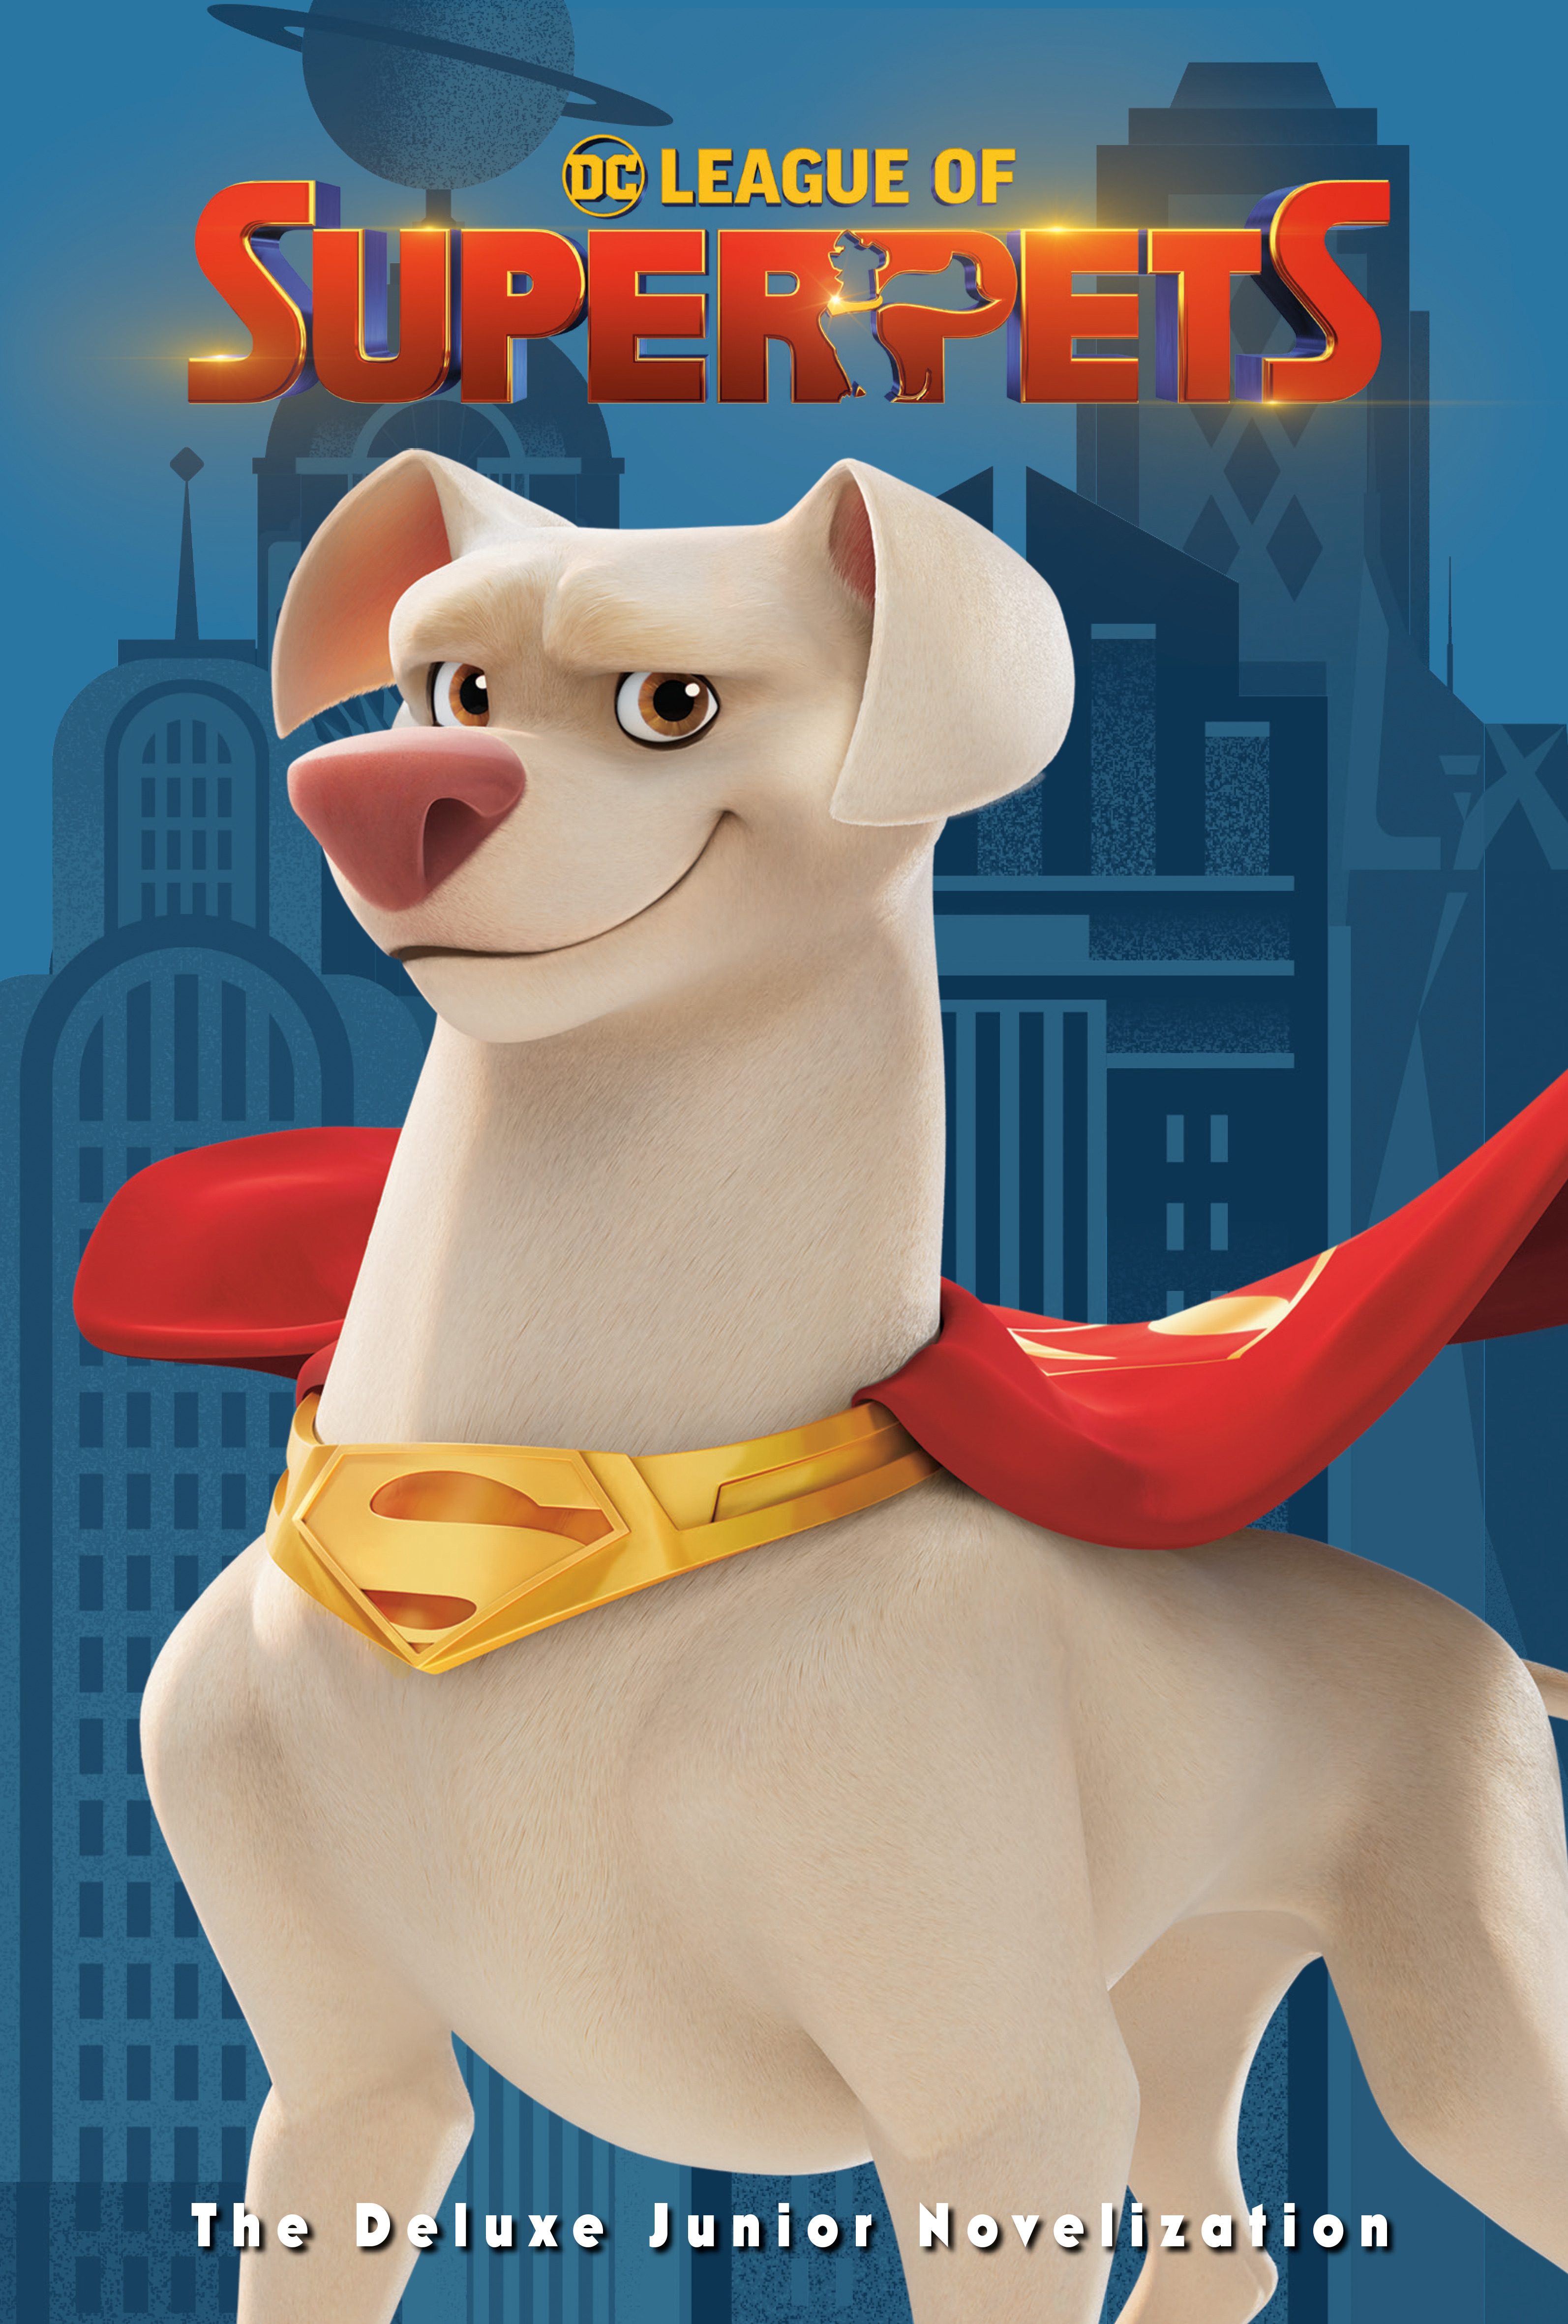 DC League of Super-Pets - The Deluxe Junior Novelization : Includes 8-page full-color insert and poster! | 